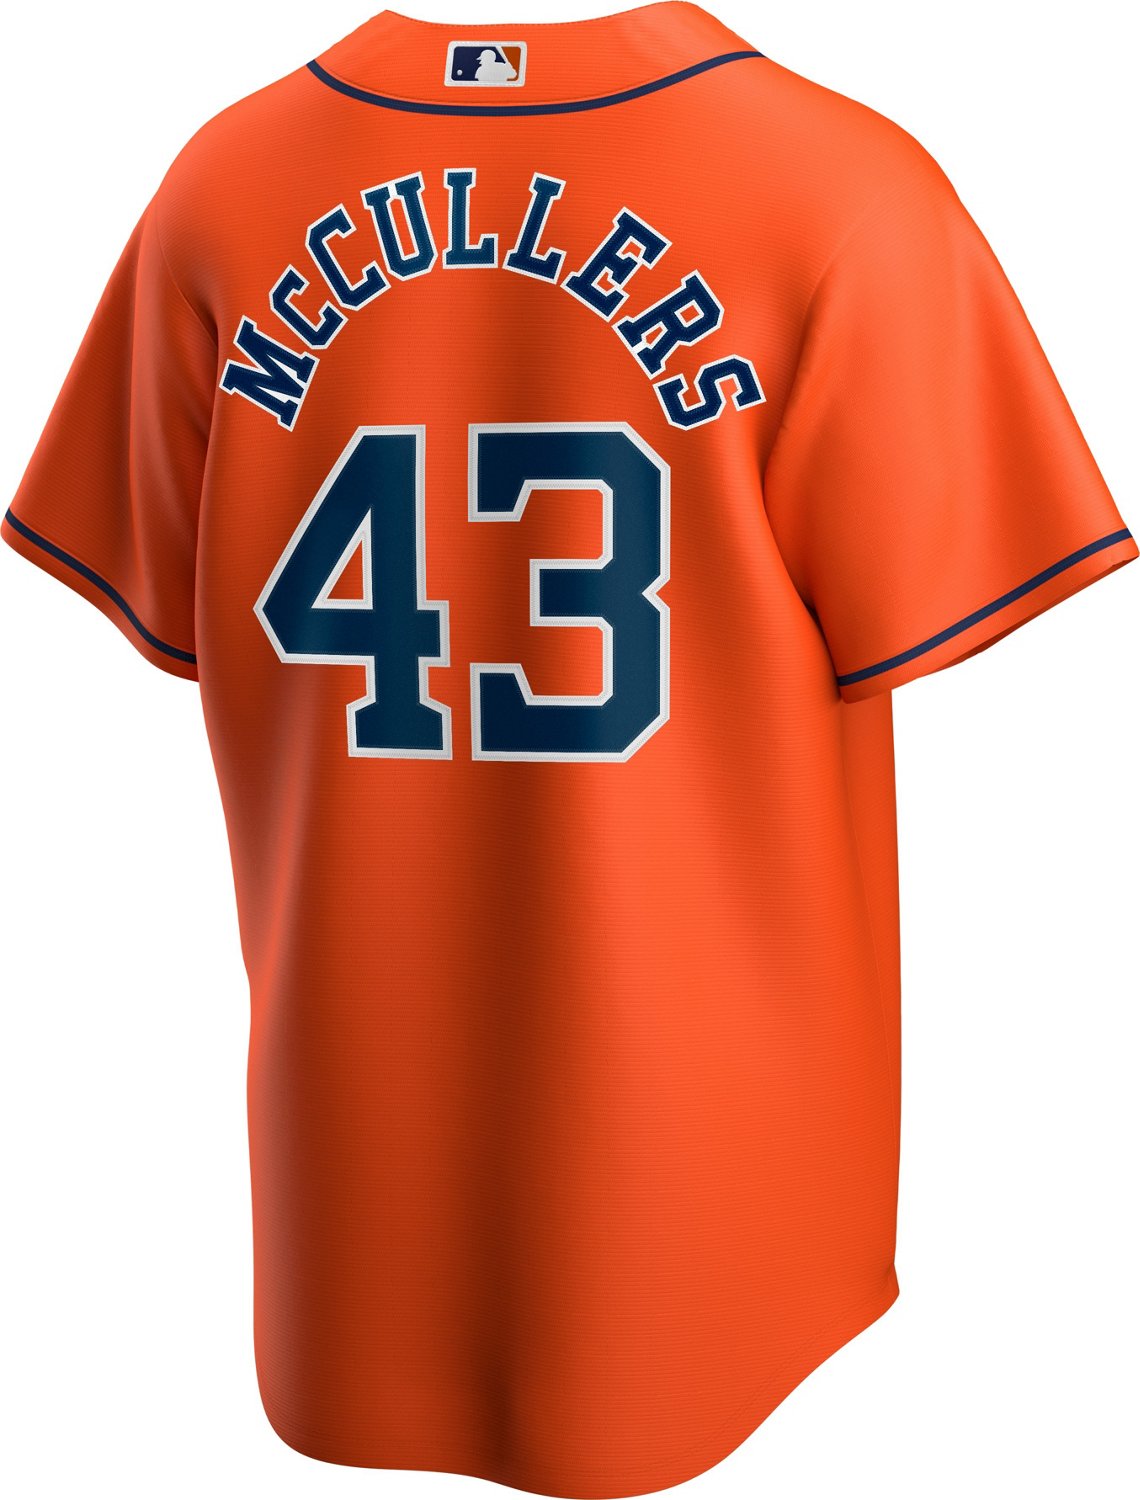 Nike Men's Houston Astros Official Player Replica Jersey Academy